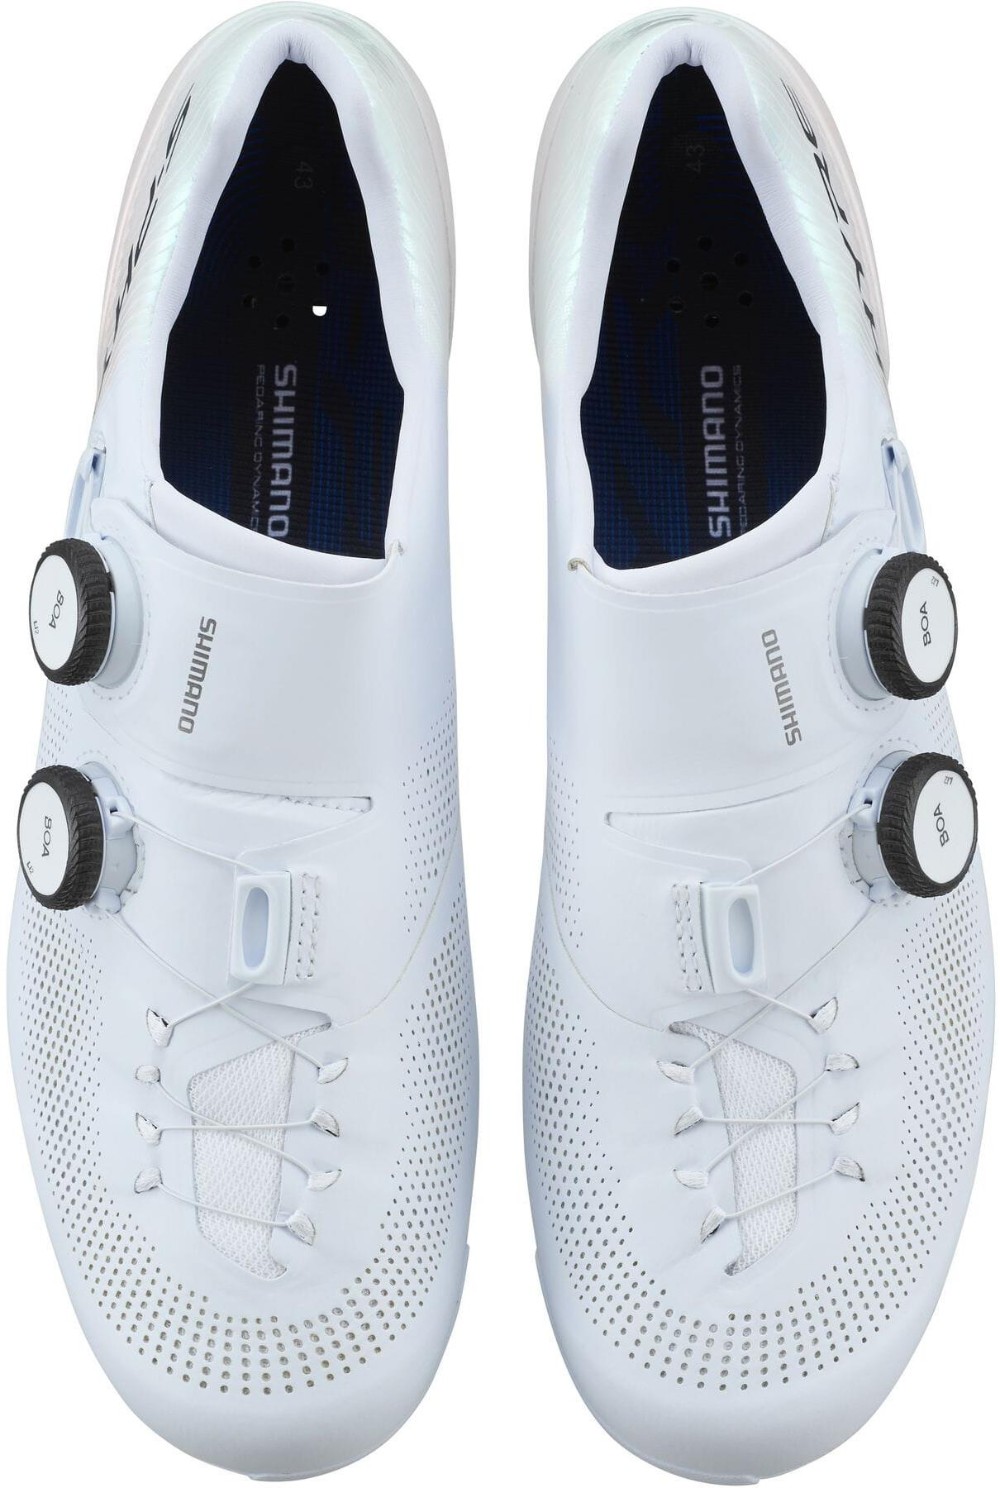 RC9 S-Phyre (RC903) Widefit Road Cycling Shoes image 1